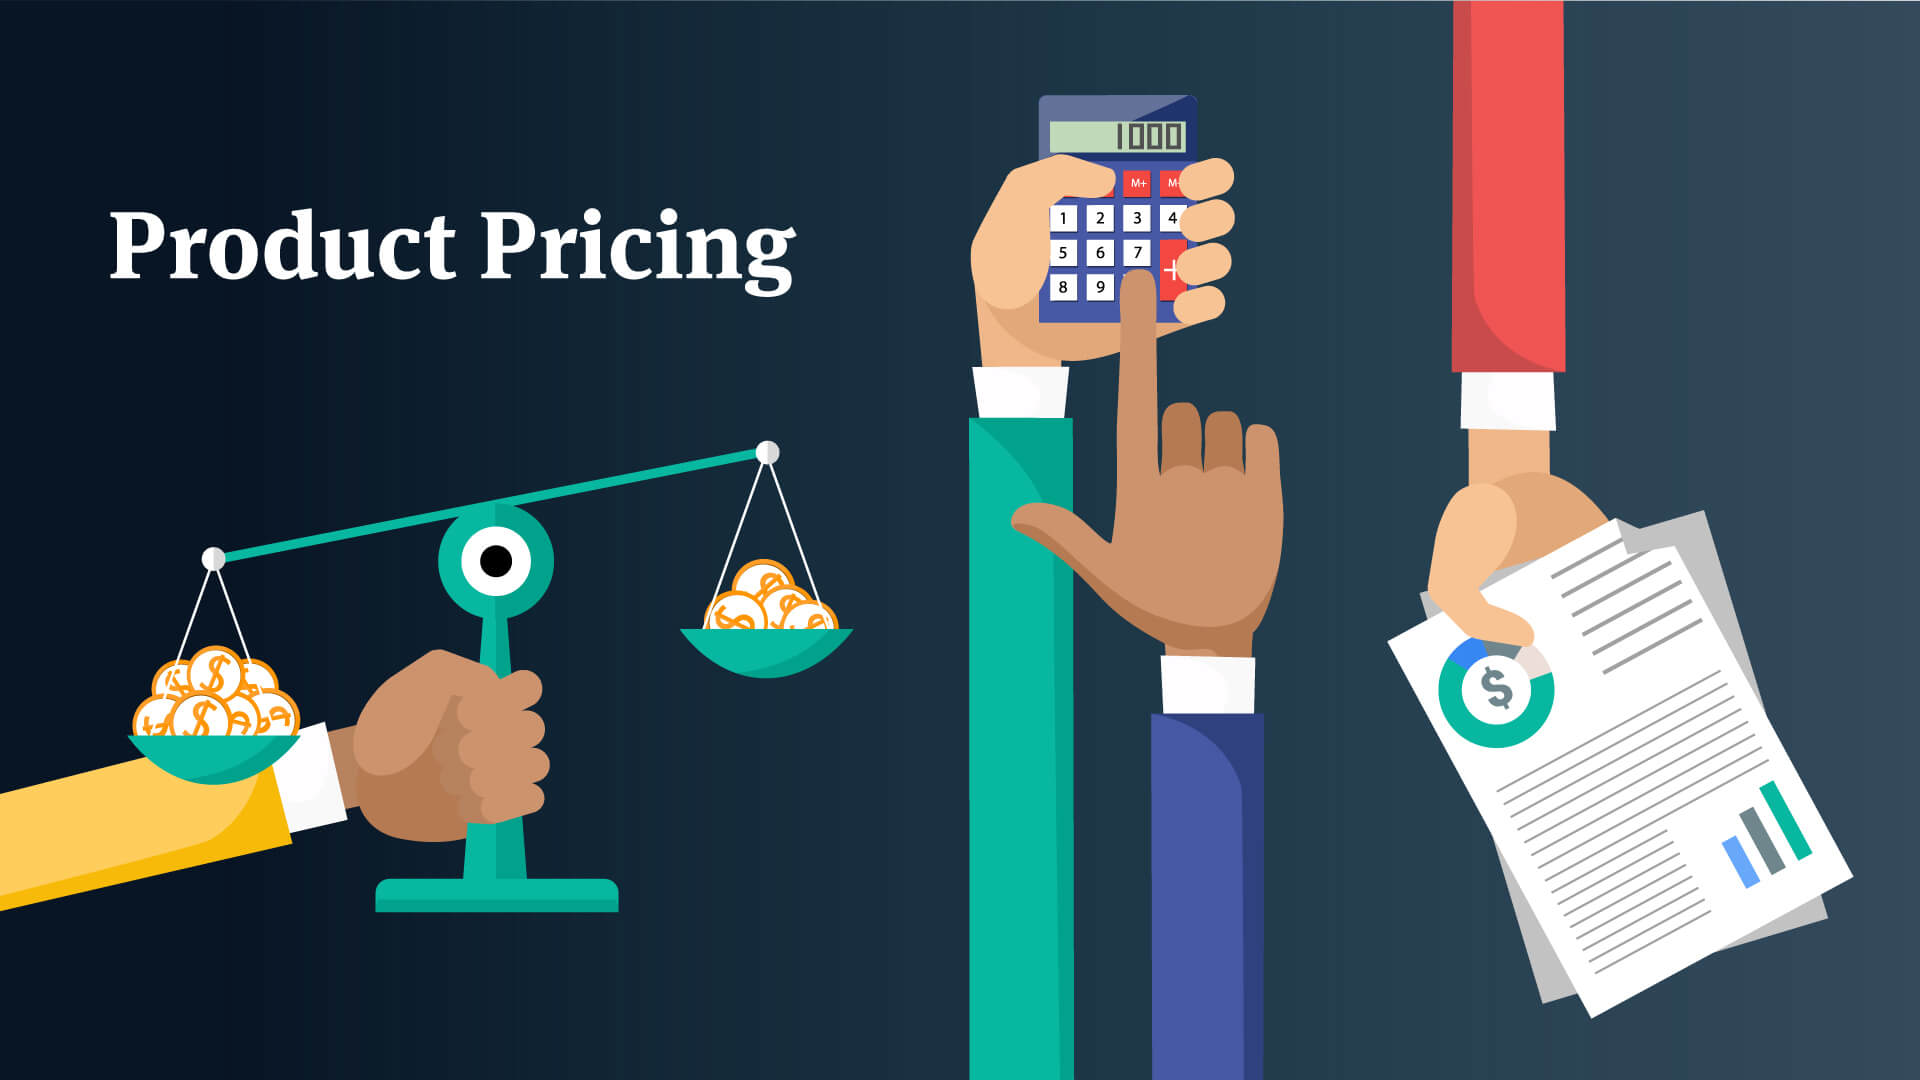 Price methods. Pricing. By product pricing. (Roi by product/service). Sales Outsourcing Literature.